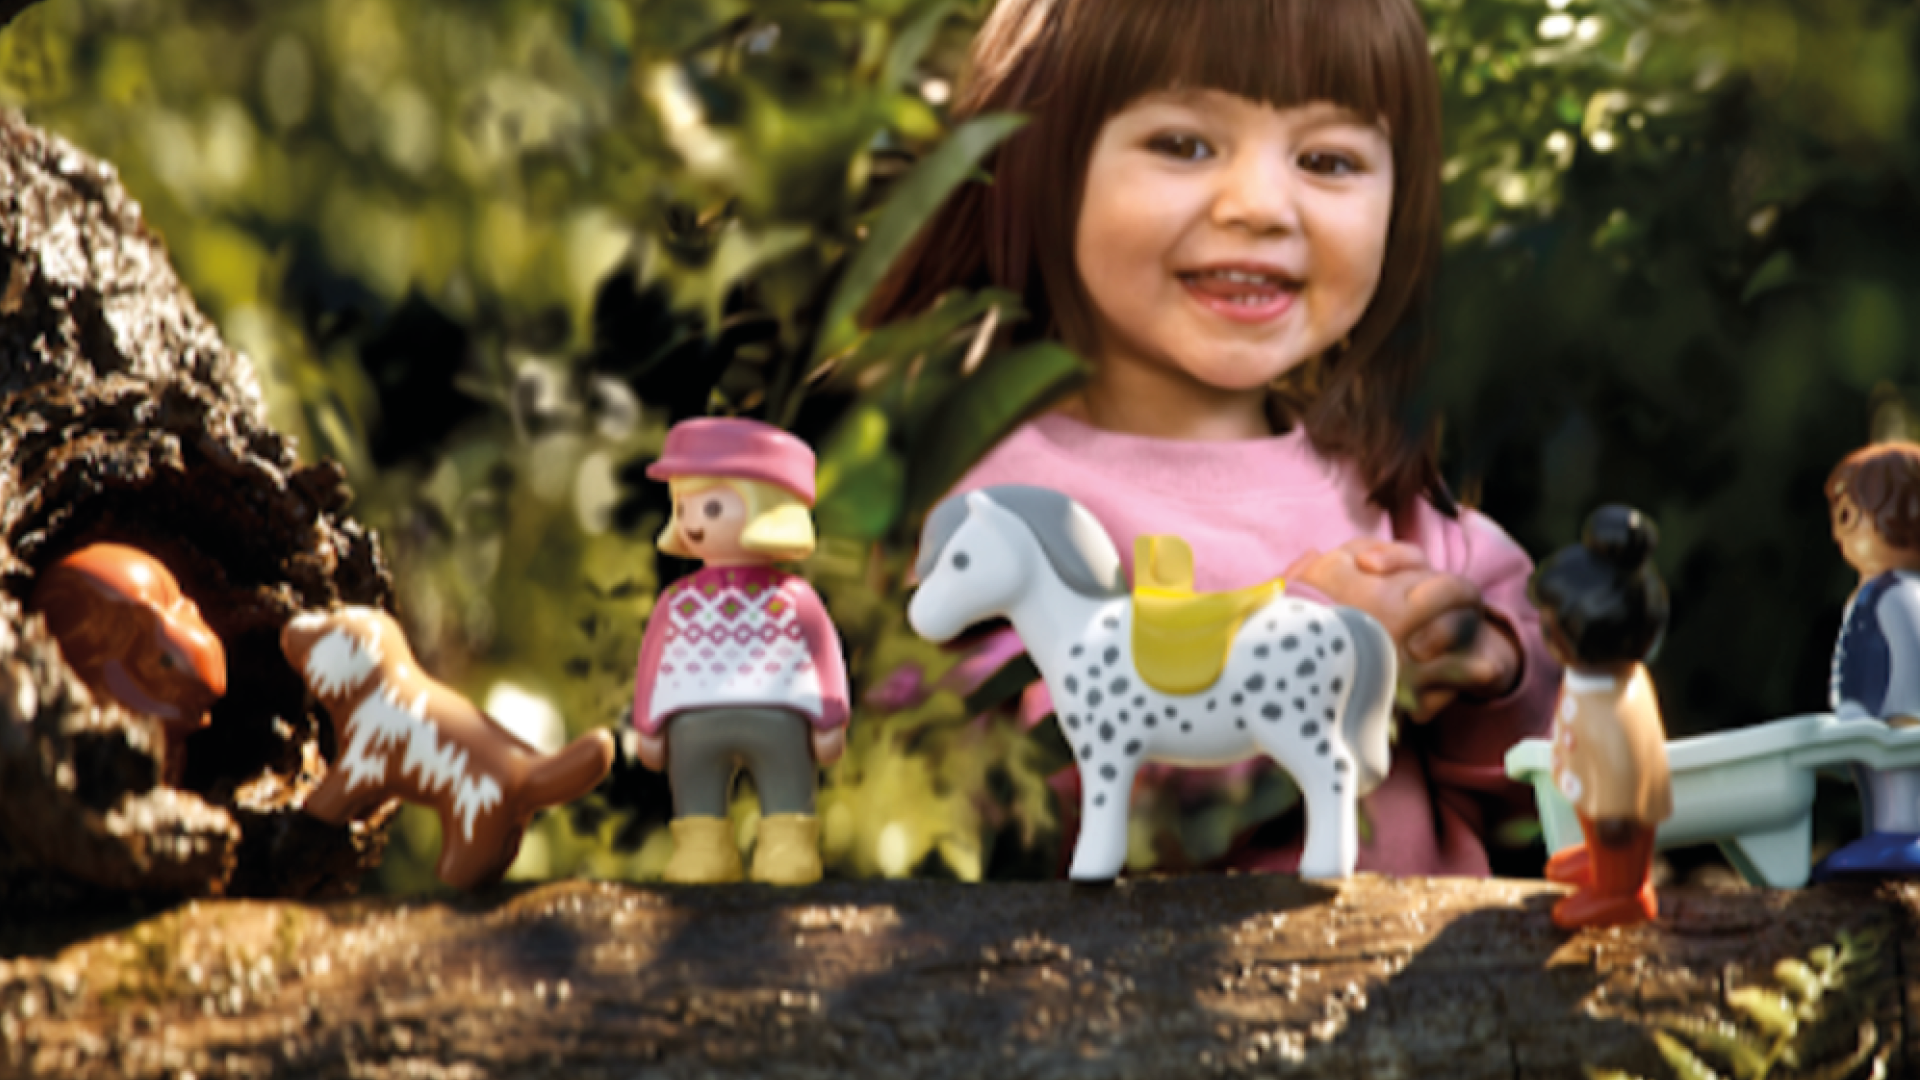 Playmobil, Disney Strike Licensing Deal for Toddler Toys - The Toy Book